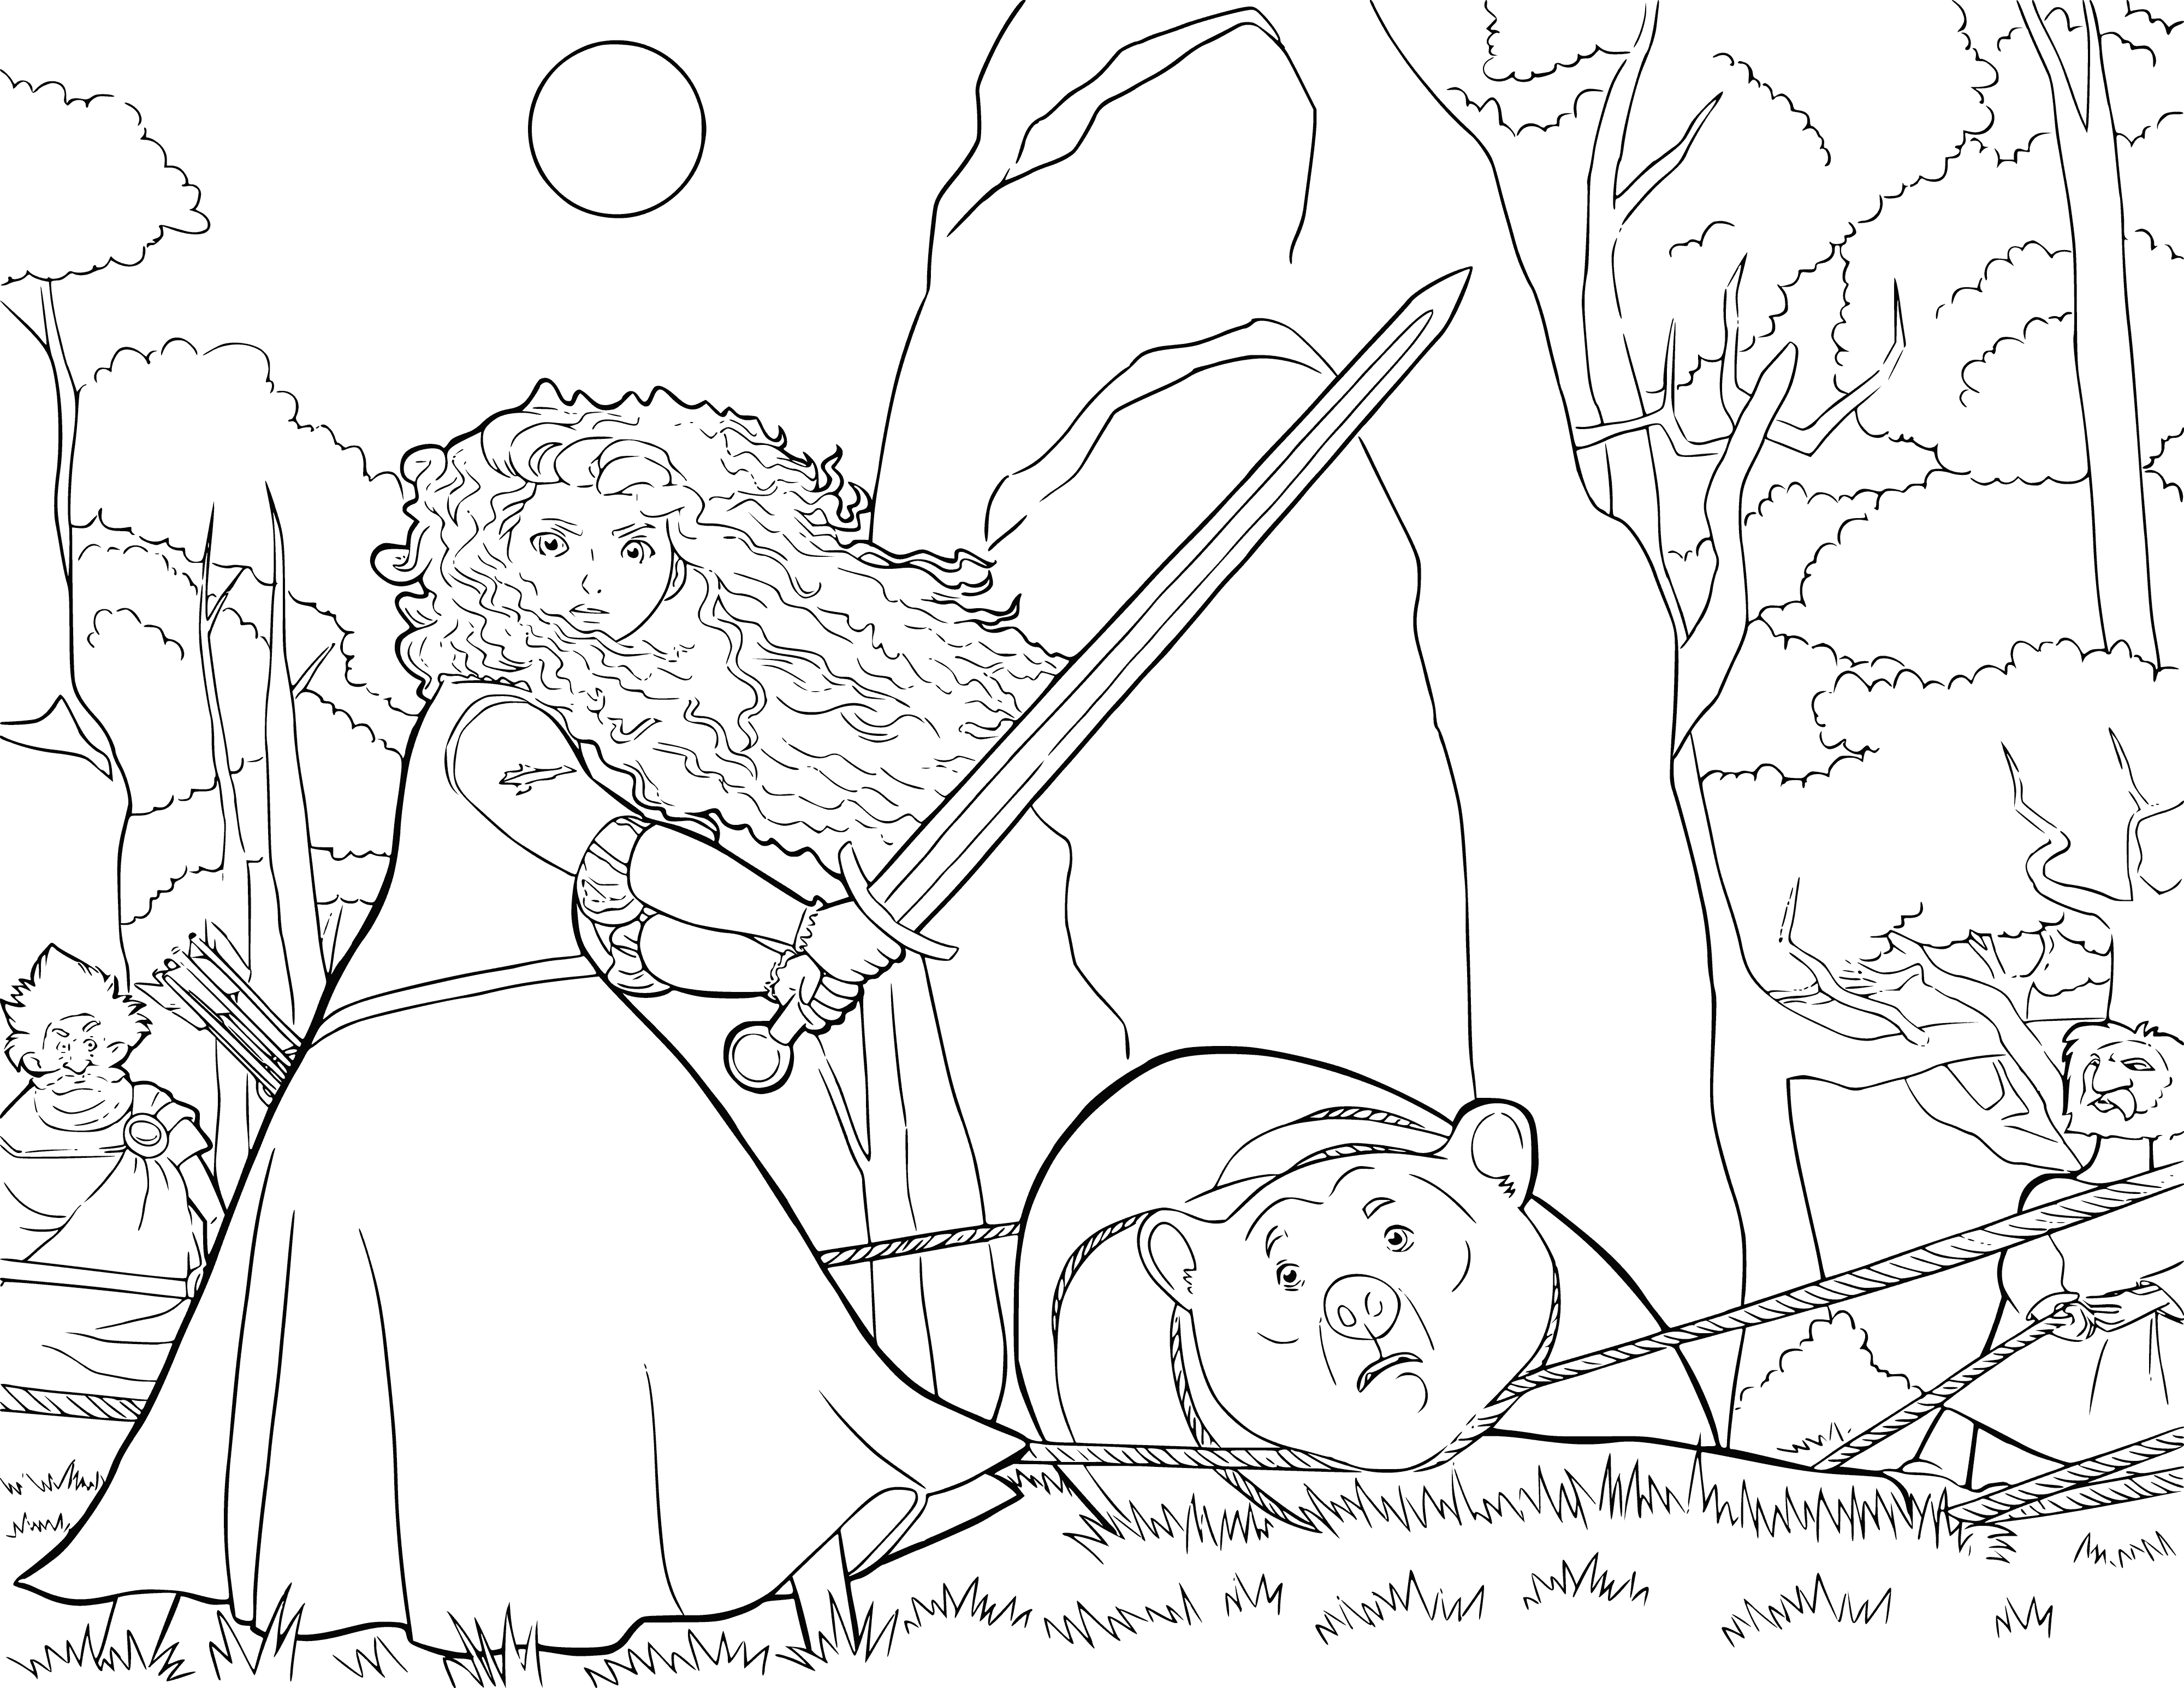 coloring page: Merida fights an ogre to save her mother, looking determined and brave.